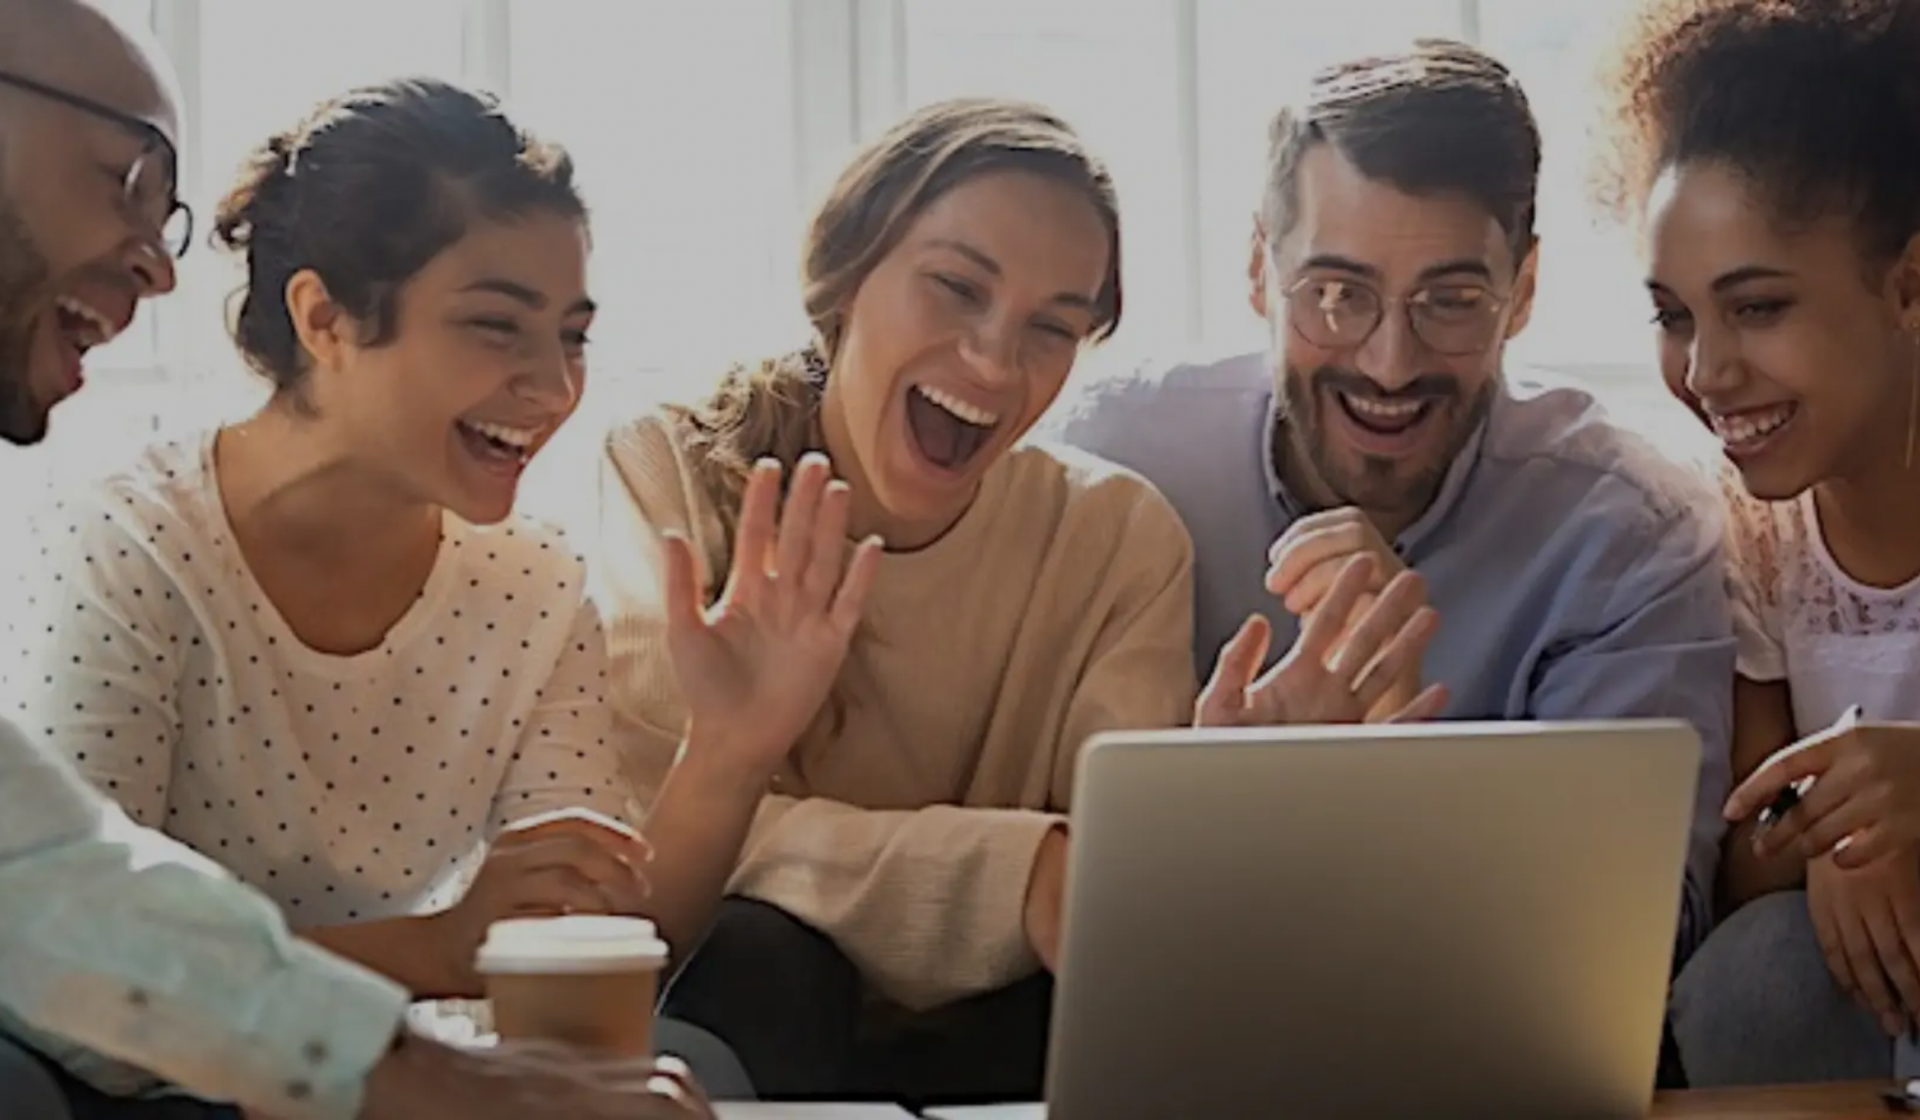 A group of people sit infront of a laptop smiling